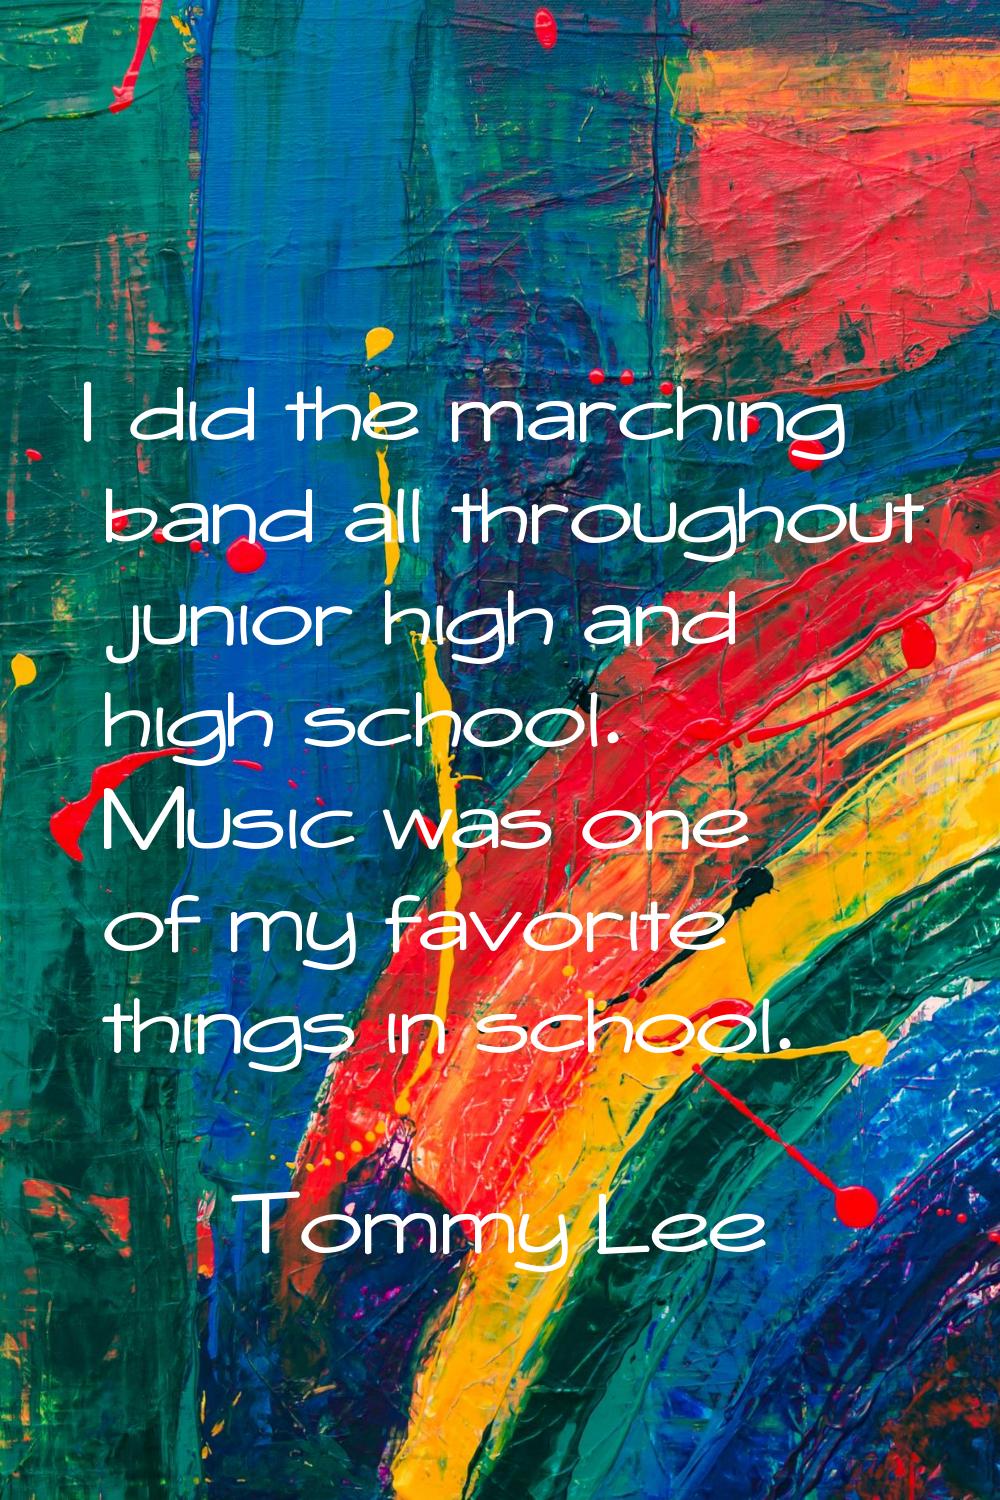 I did the marching band all throughout junior high and high school. Music was one of my favorite th